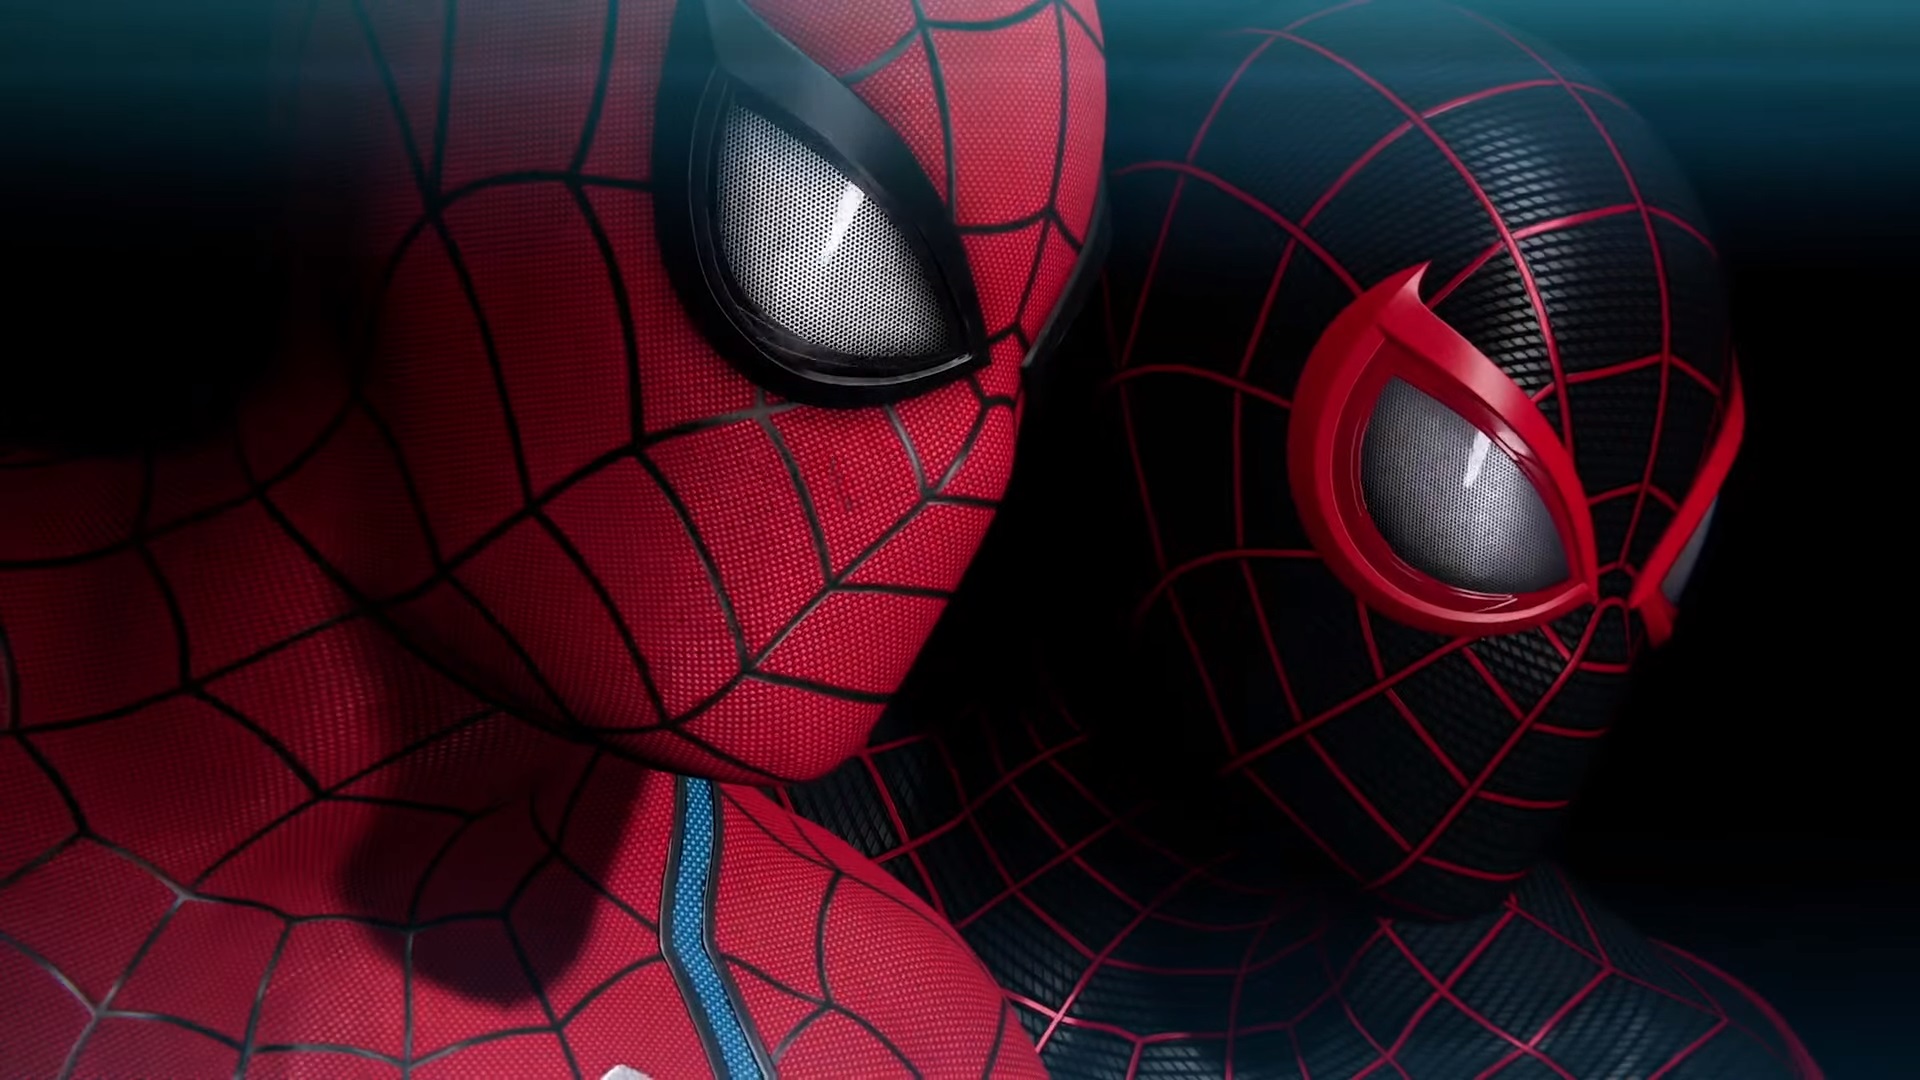 Marvel's Spider-Man 2: release window, trailer, news and more